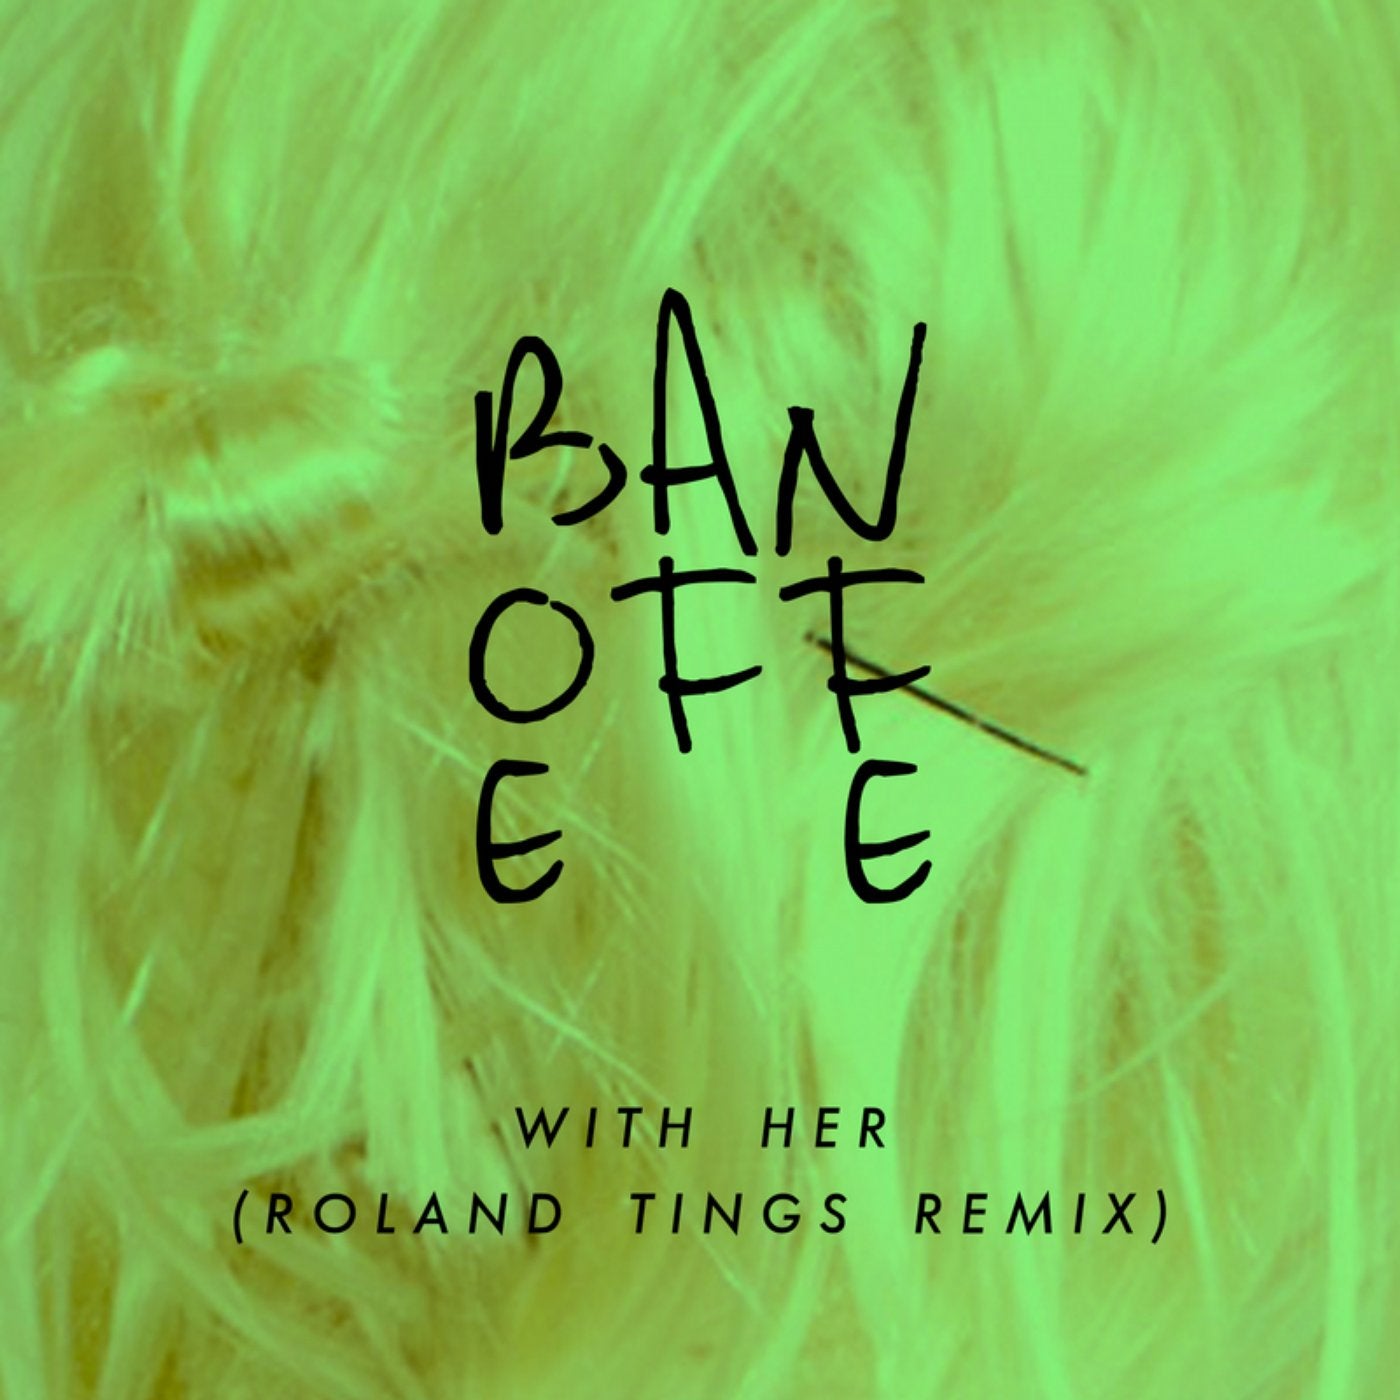 With Her (Roland Tings Remix)